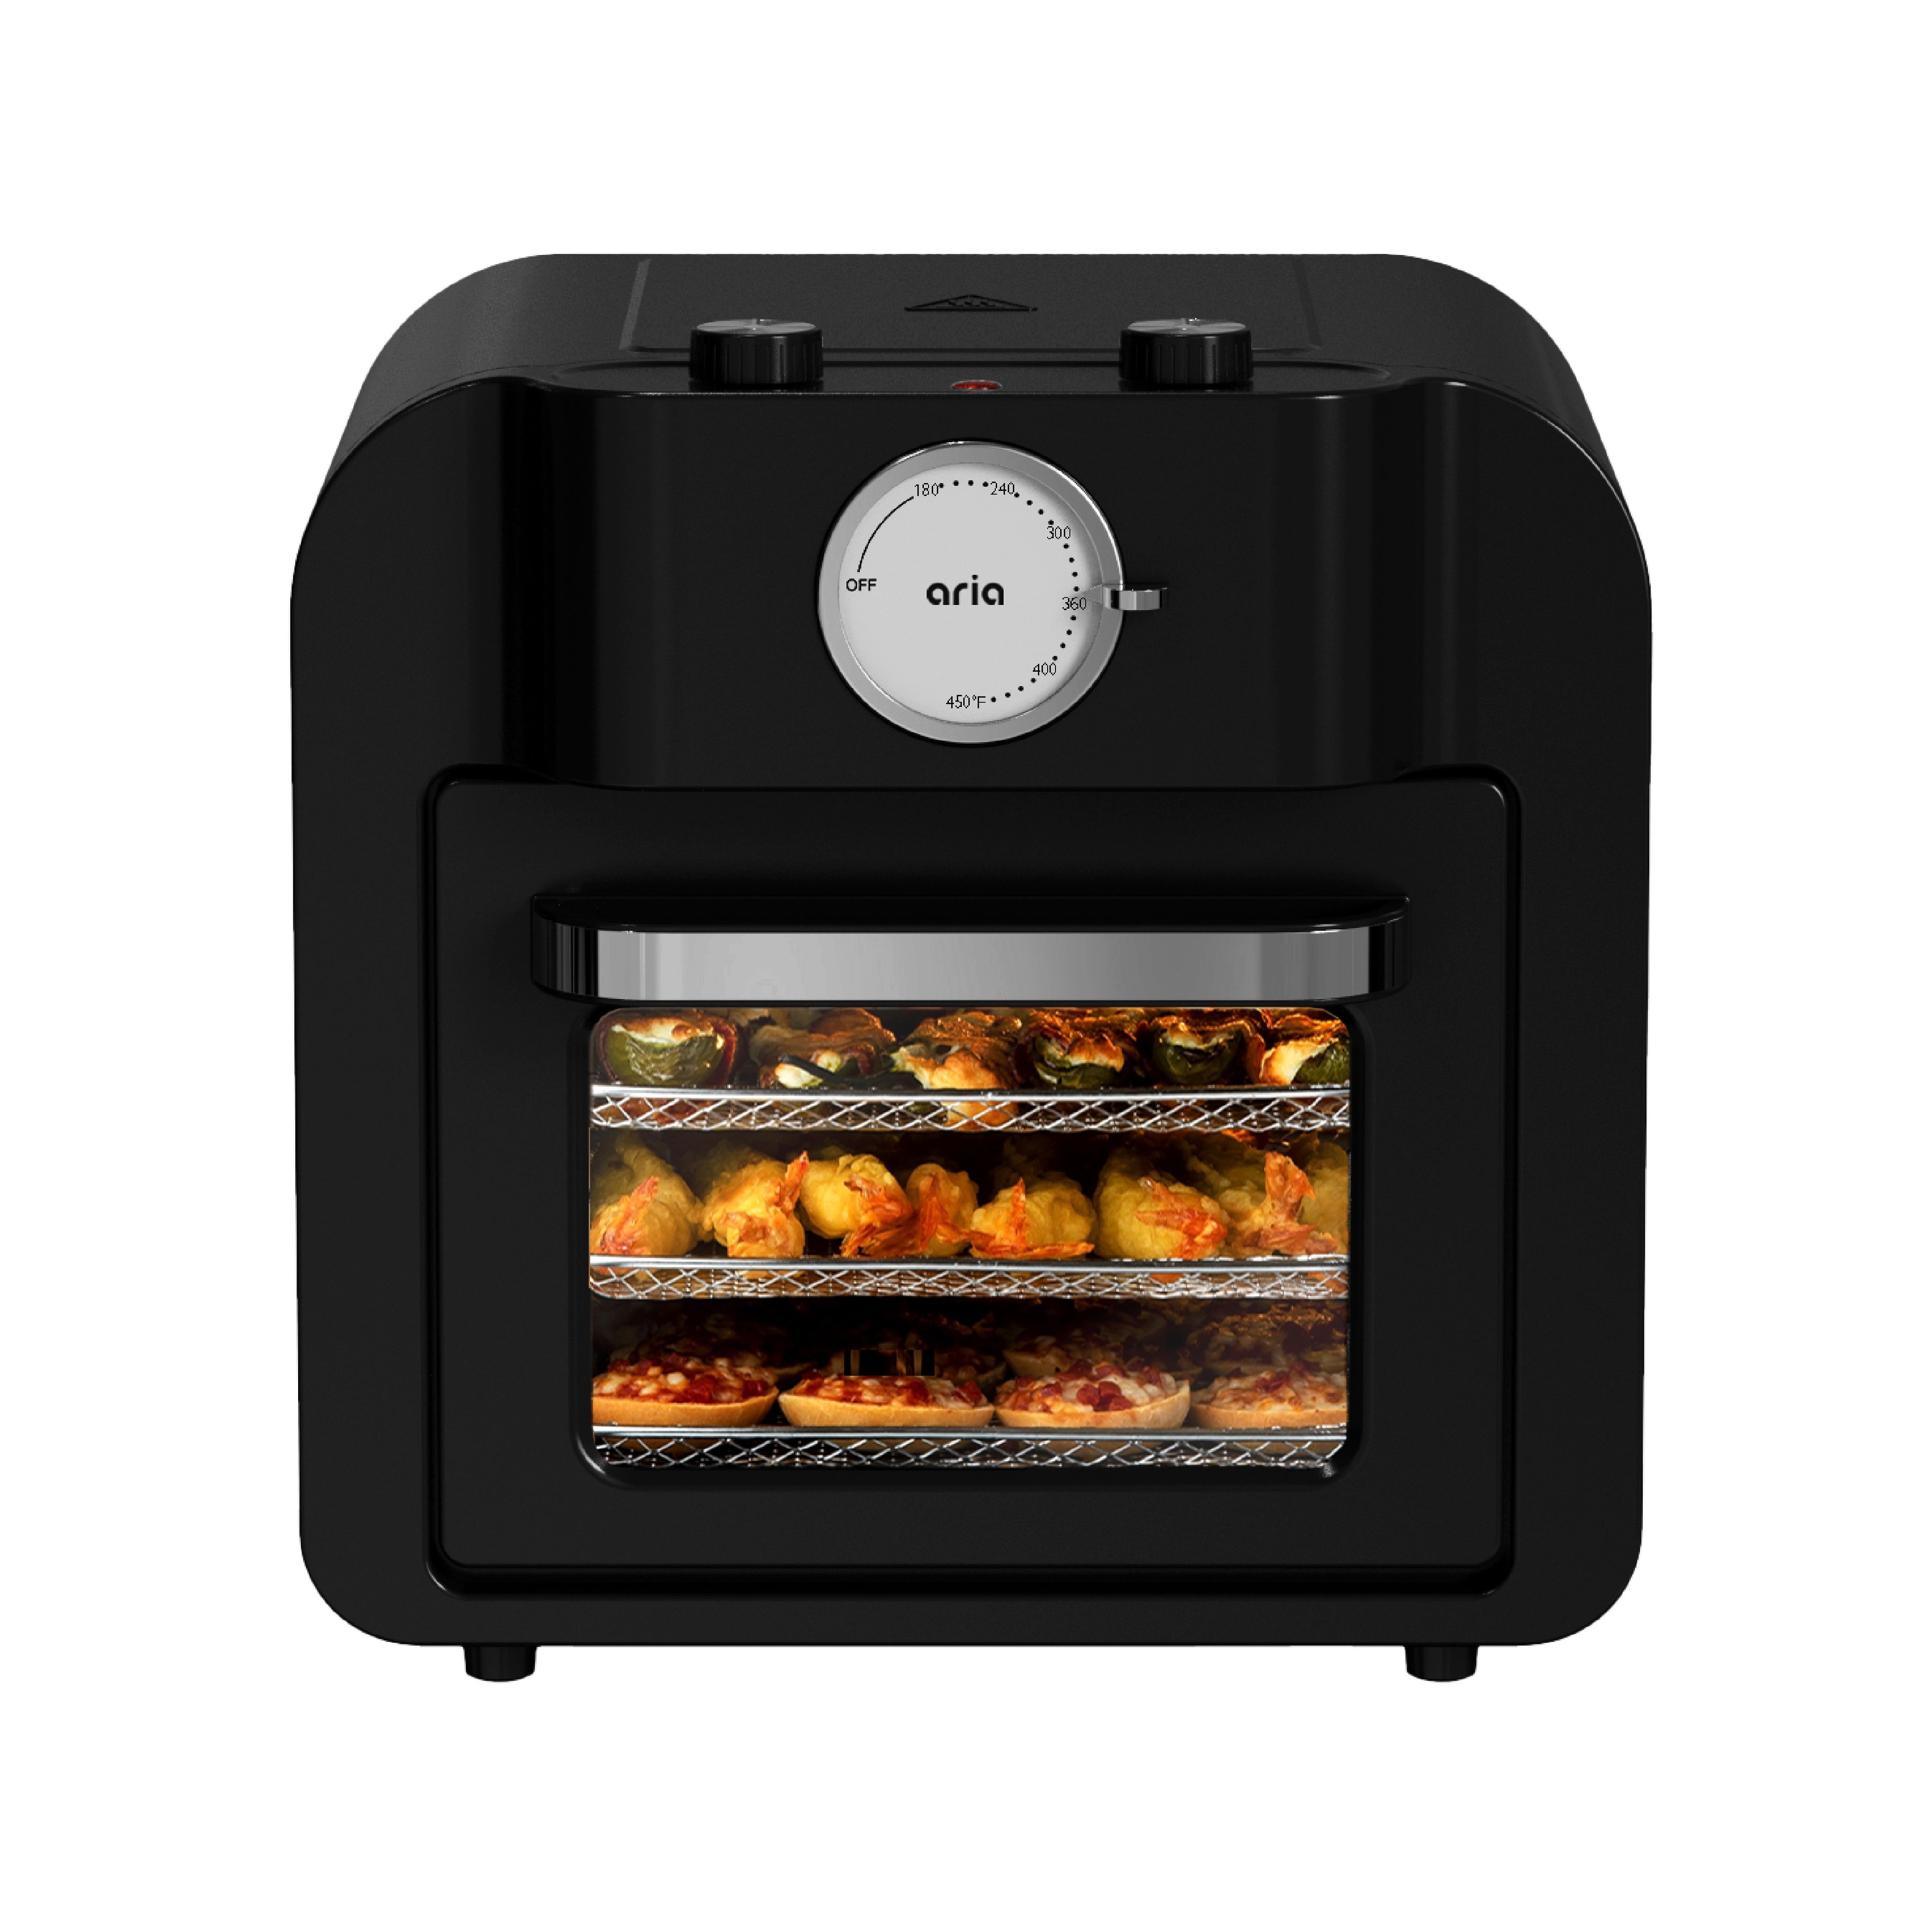 https://ak1.ostkcdn.com/images/products/is/images/direct/693461e8e3419f02fa6ab0a188f4b32cddbbd3f1/Aria-16QT-Retro-Air-Fryer-Toaster-Oven.jpg